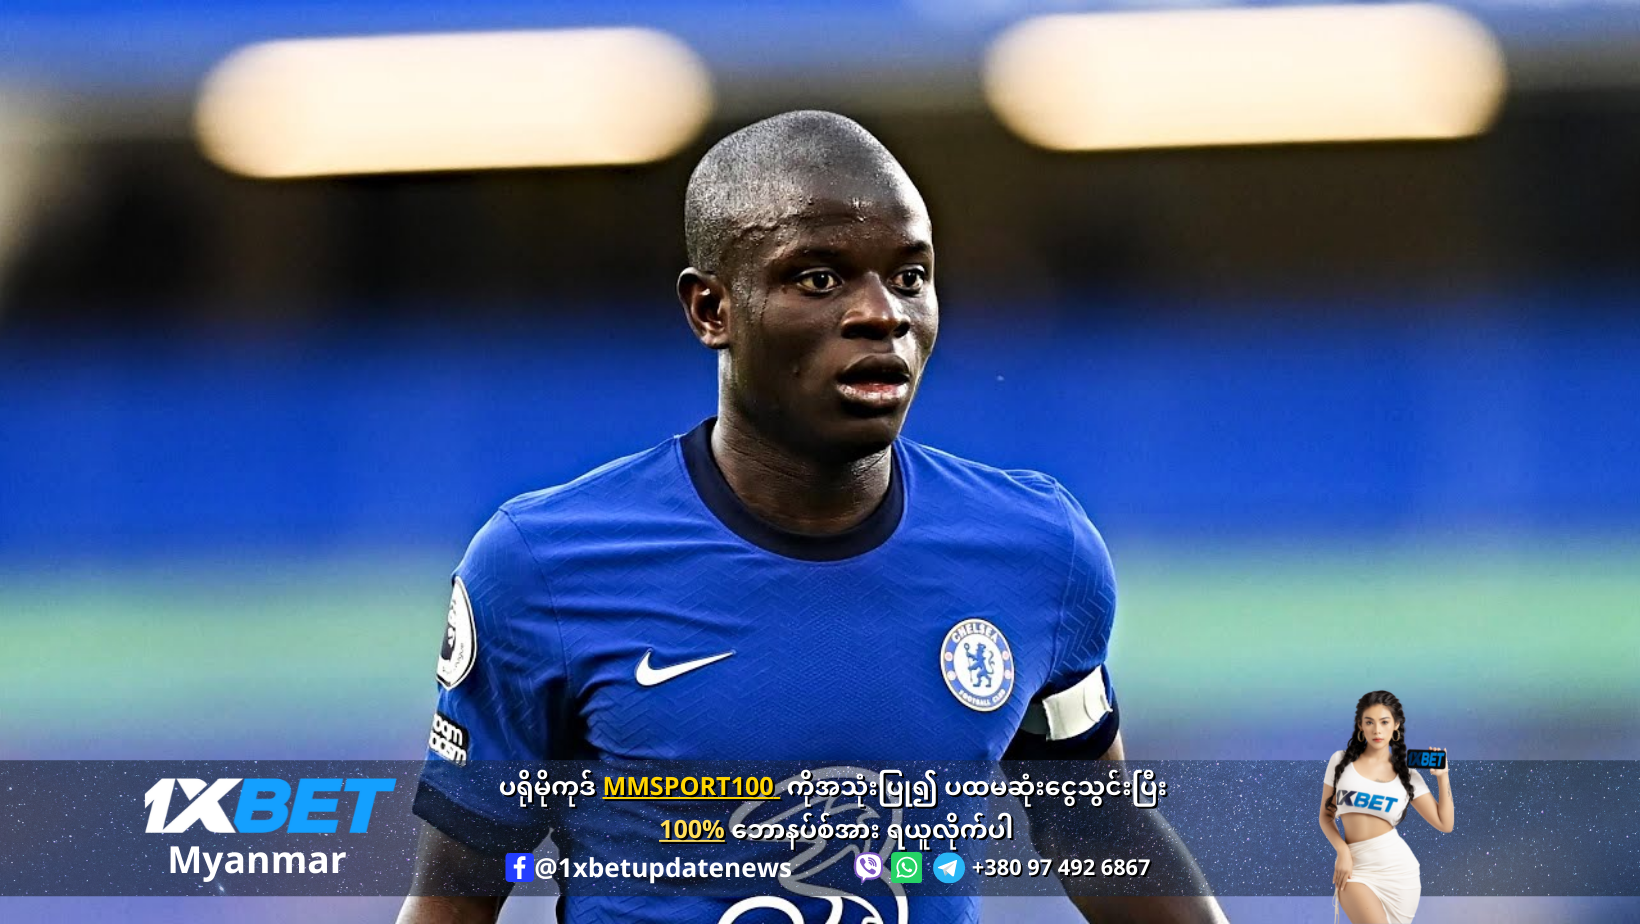 Kante will leave Chelsea